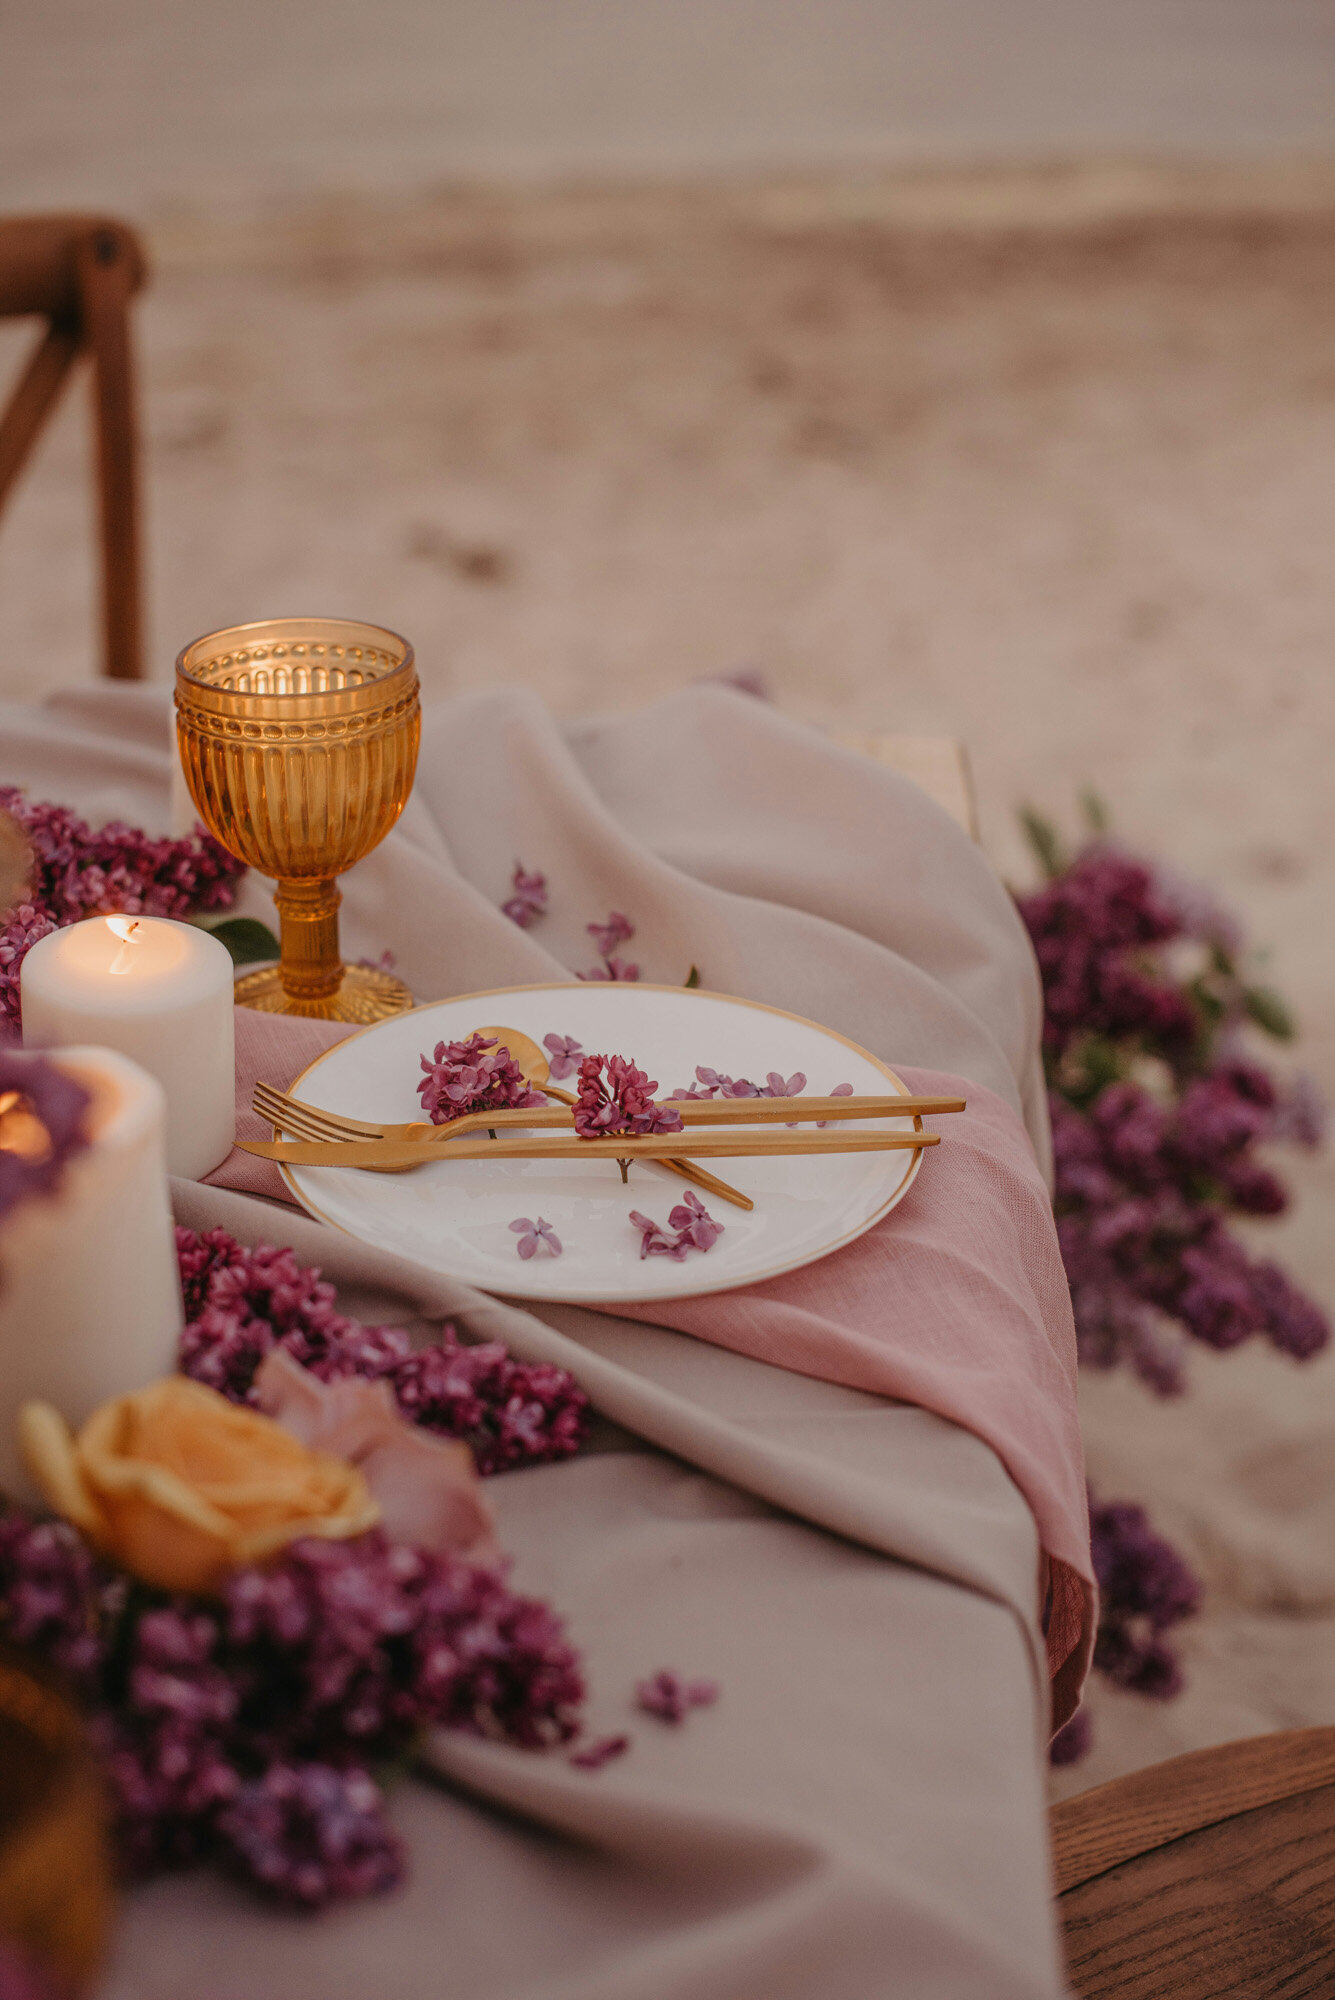 Table with purplish cloth, dinnerwares, glass and lighted candle